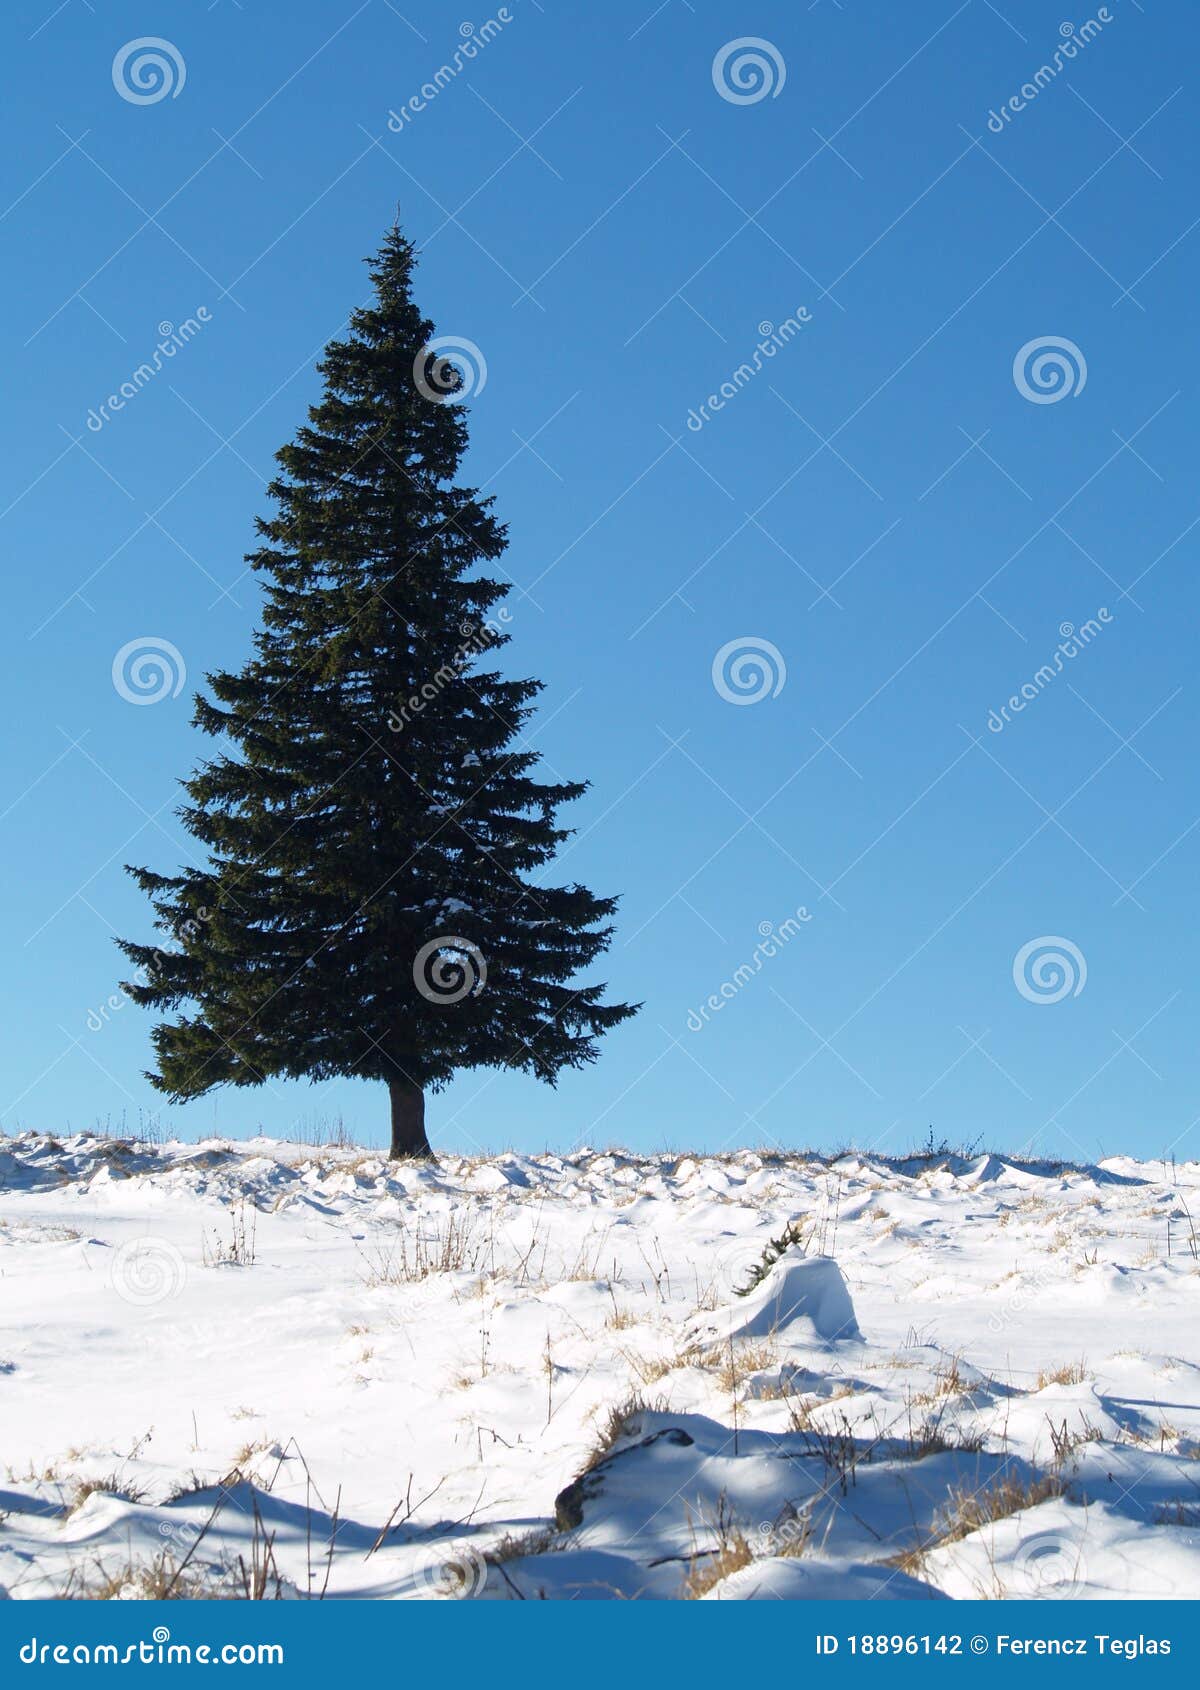 Serenity tree in winter stock photo. Image of landscape - 18896142